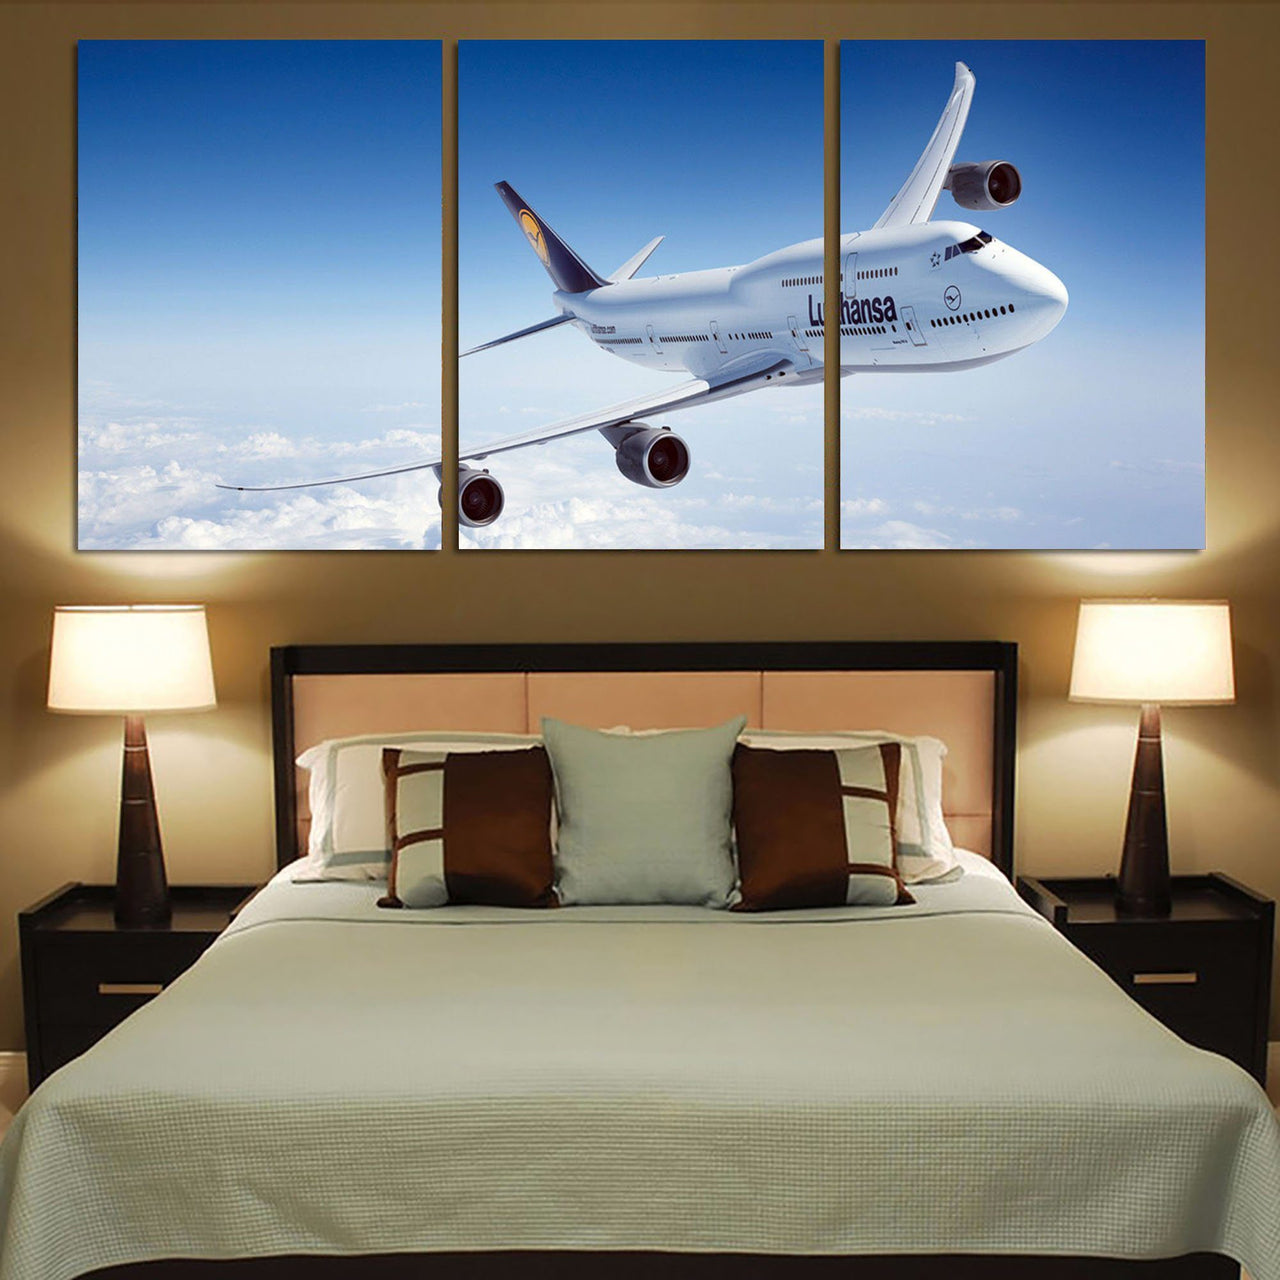 Cruising Lufthansa's Boeing 747 Printed Canvas Posters (3 Pieces) Aviation Shop 